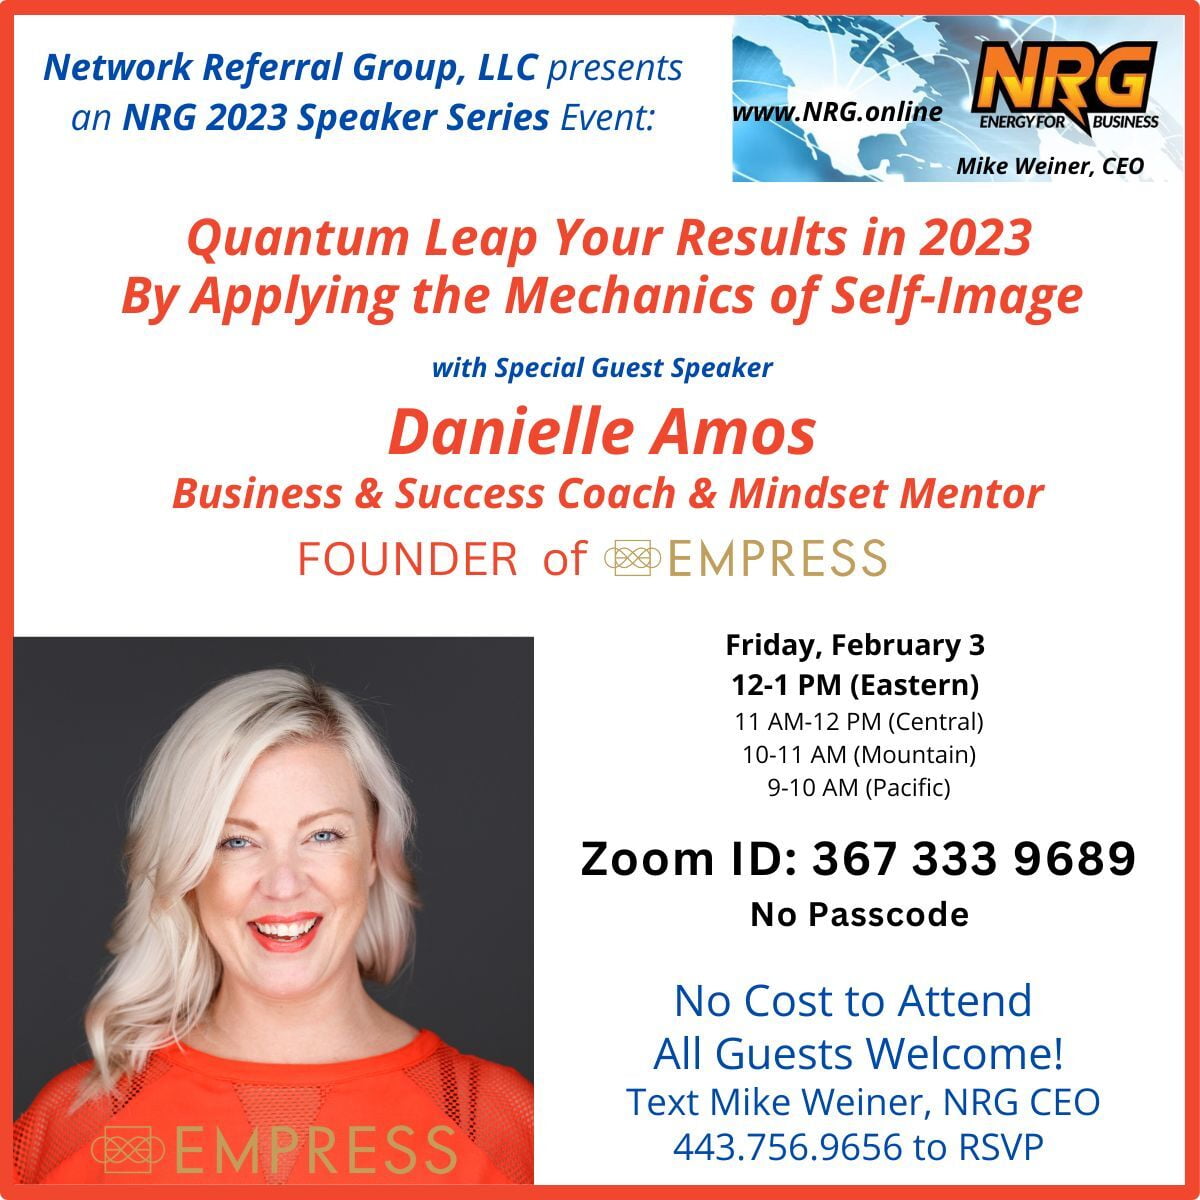 The 2023 NRG Speaker Series welcomes Danielle Amos on Friday, Feb. 3, 12PM EST / 11AM CST / 9AM PST. Business Coach and Northern California NRG member, Tom Kavanaugh will talk about “Making NRG Work for Your Business”  Zoom ID: 367-333-9689, no passcode. Text Mike Weiner at 443.756.9656 to RSVP.